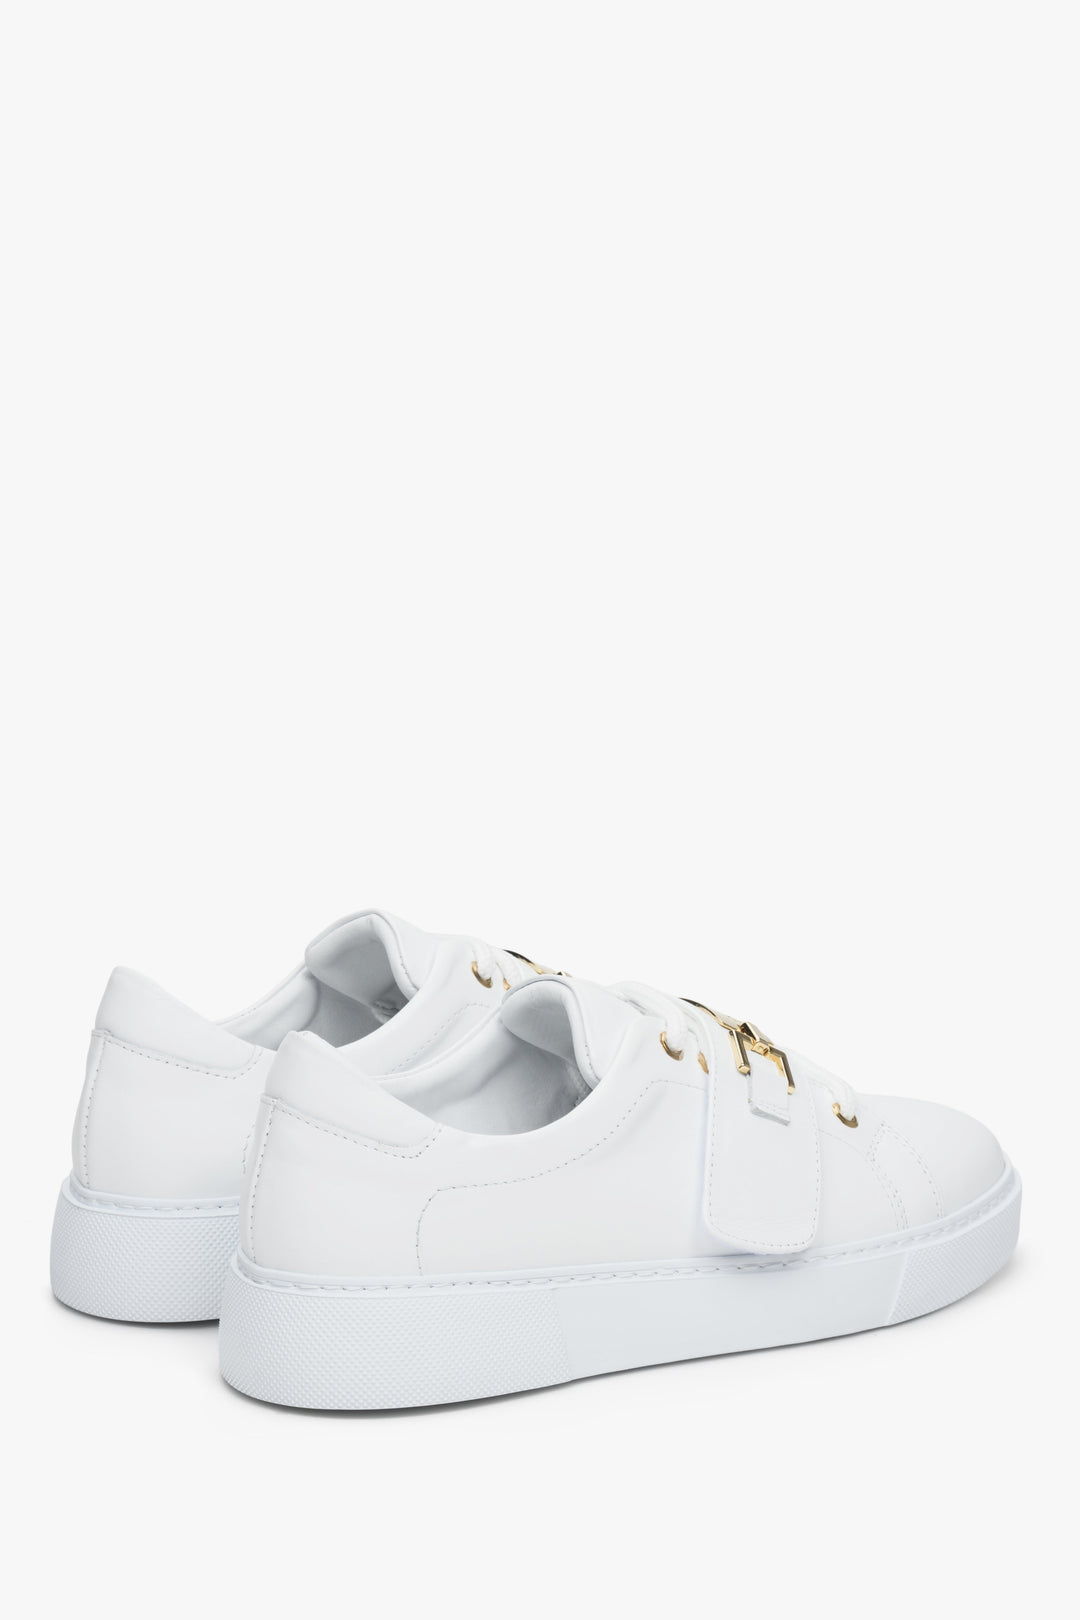 Women's white leather sneakers by Estro with a gold embellishment - close-up on the heel and side seam of the shoes.